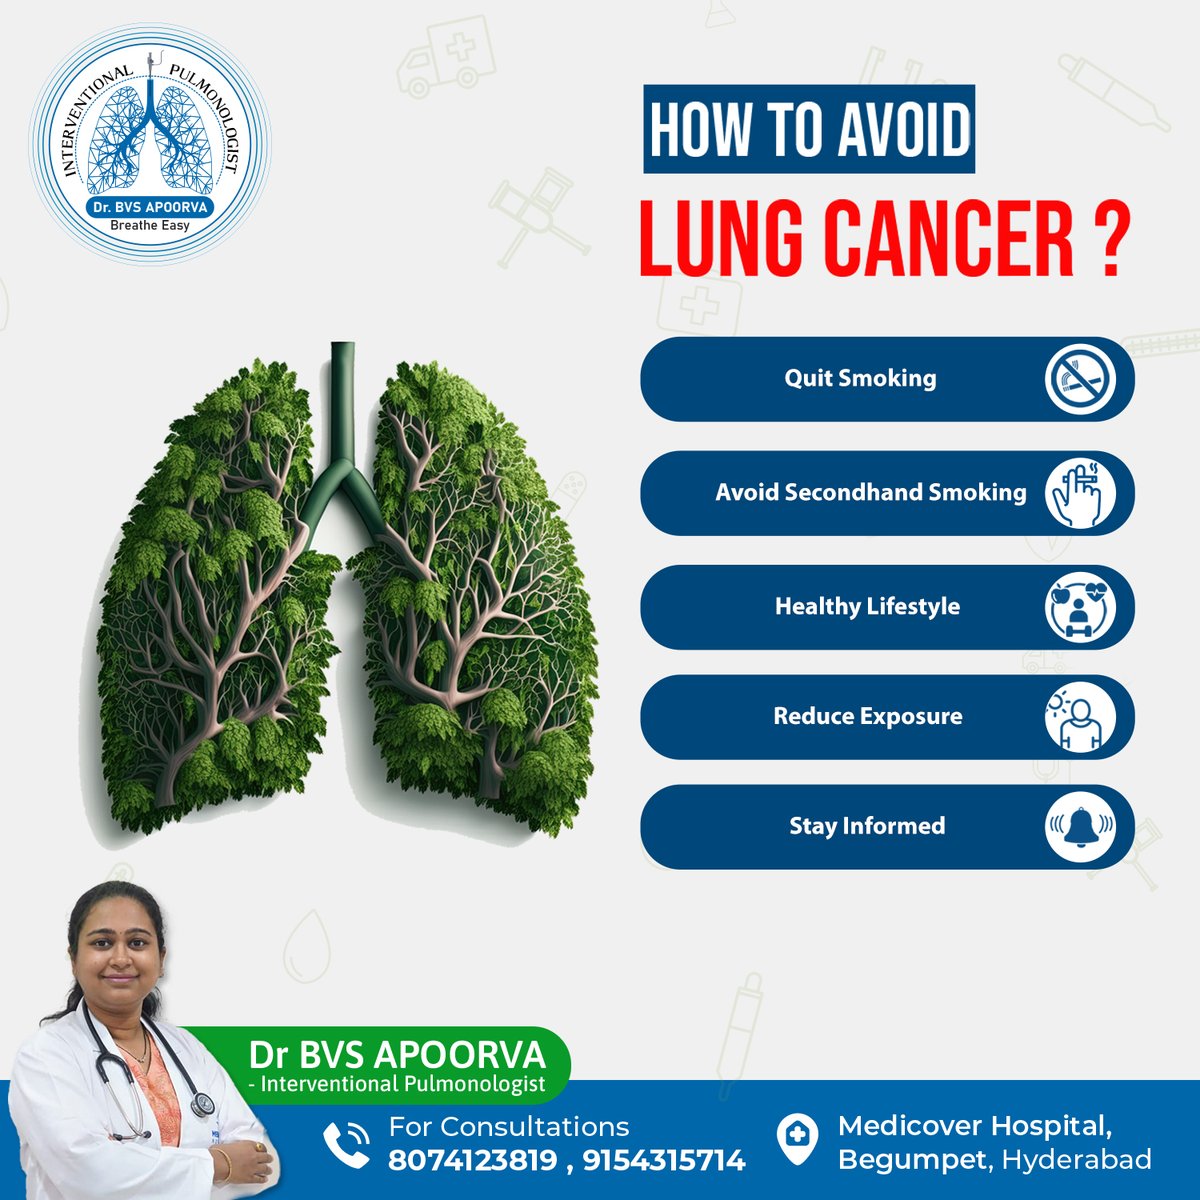 How to avoid lung cancer? Protect your lungs, protect your life. 

Contact us :
Consultation : 8074123819, 9154315714
Website : medicoverhospitals.in/doctors/dr-b-v…

#DrApoorva #Pulmonologist #hyderabad  #lungcancer #lungs #freshair #LungCancerPrevention #QuitSmoking #SecondhandSmoke